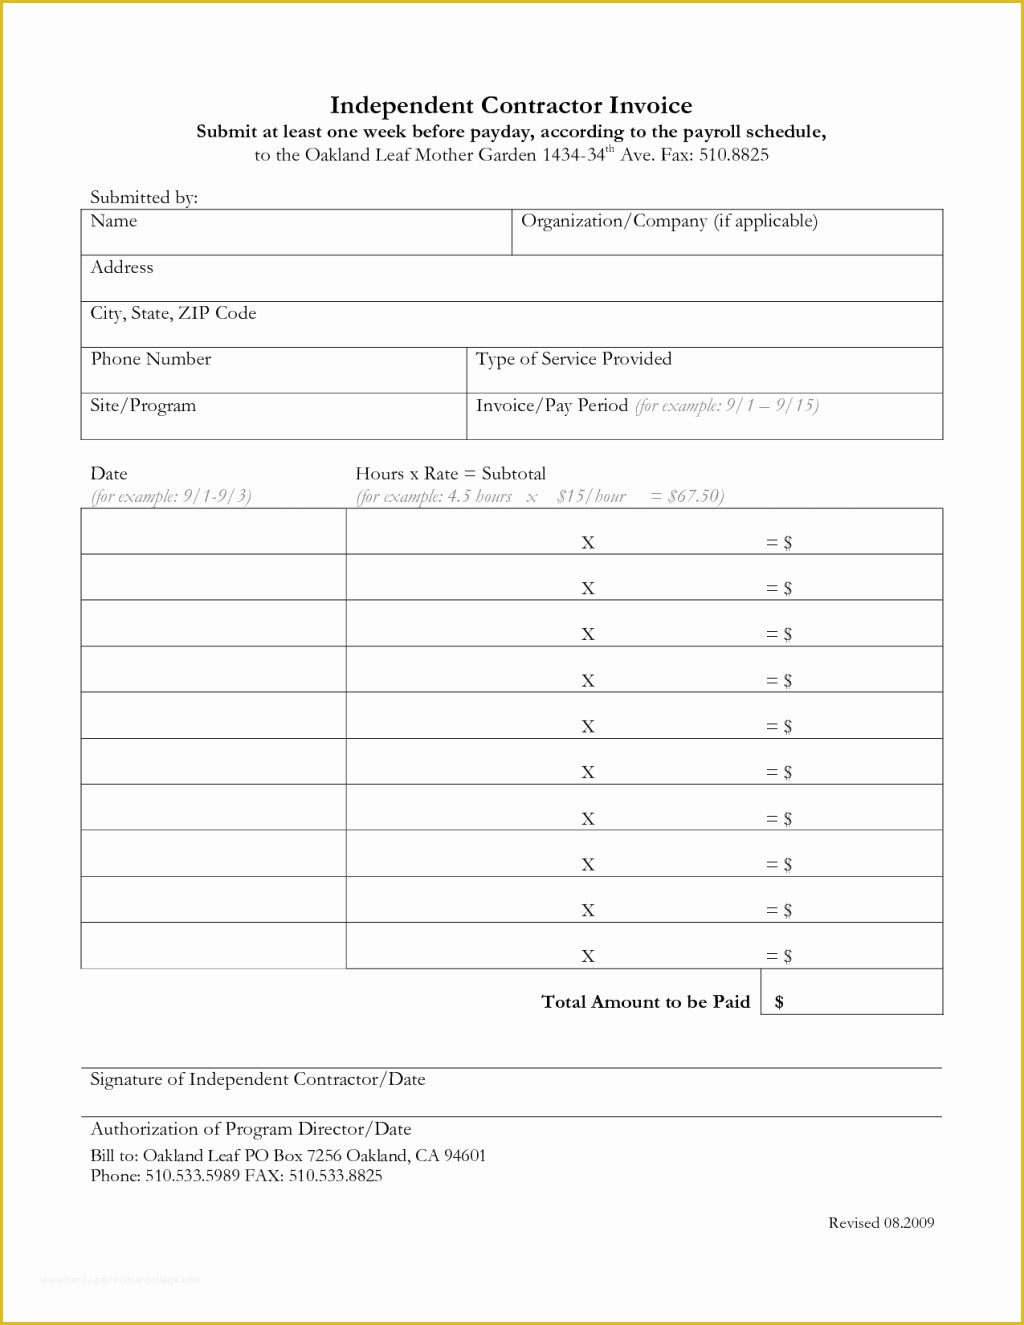 Billing Invoice Template Free Of Free Billing Template Invoice Blank Blankinvoice org